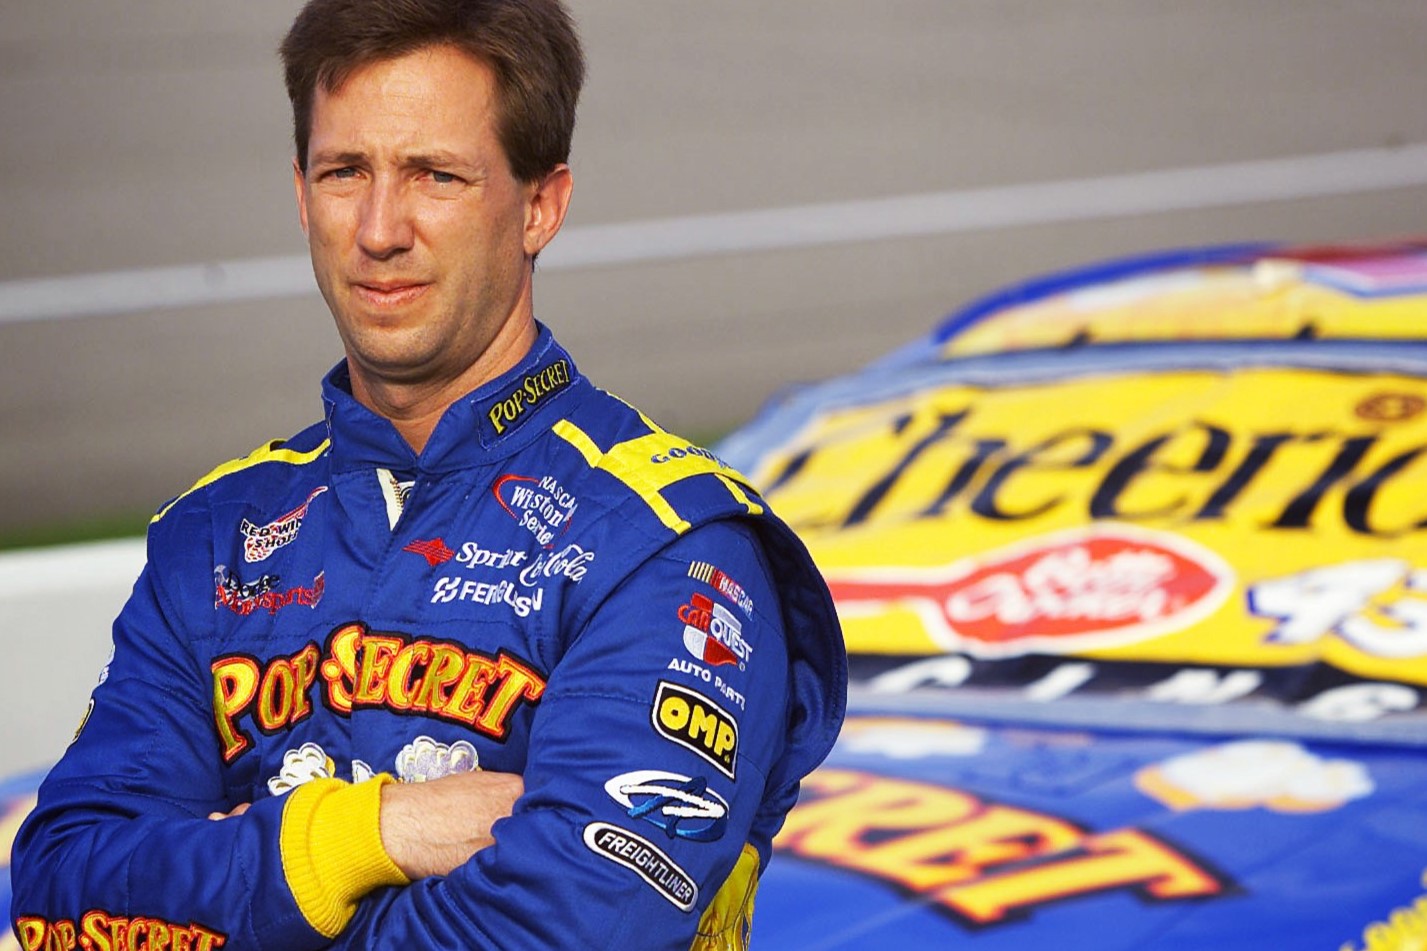 15-mind-blowing-facts-about-john-andretti